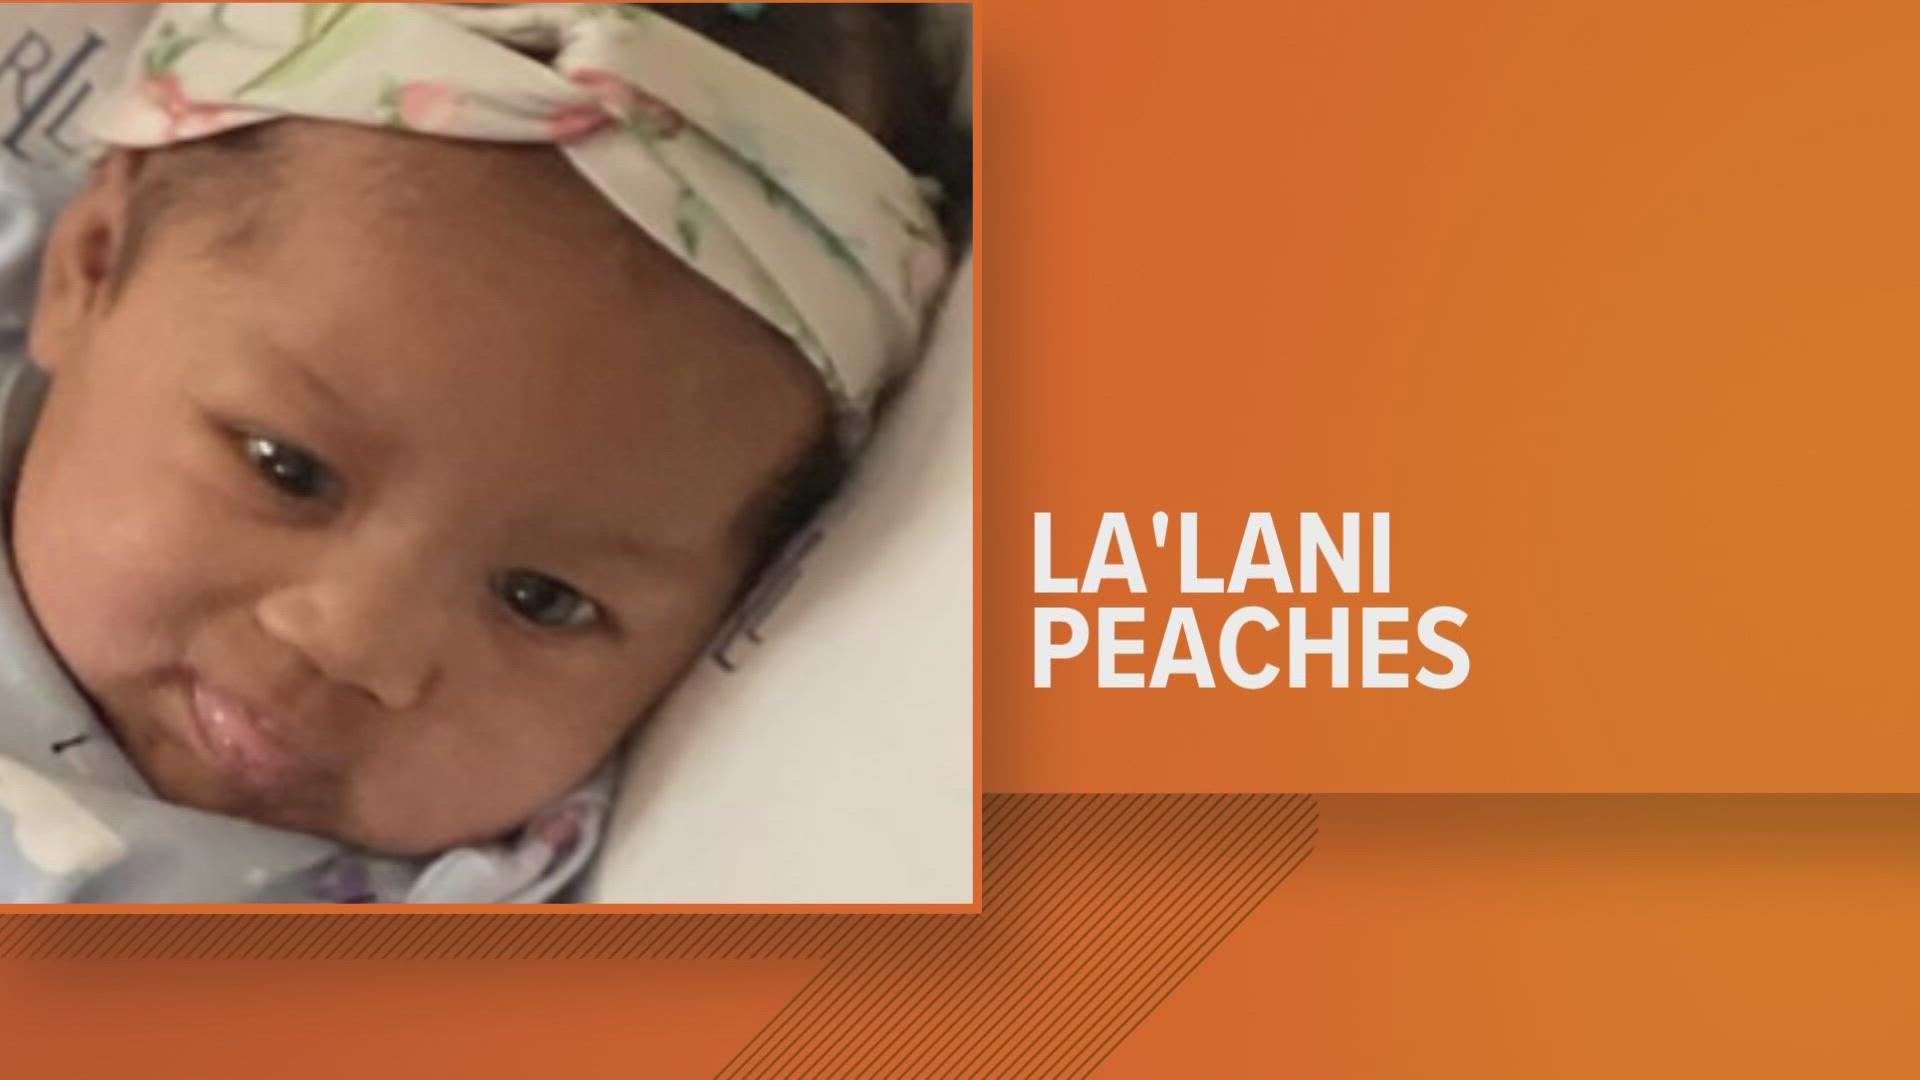 3 month old La'lani went missing out of Indianapolis and was last seen at 6pm Tuesday night.